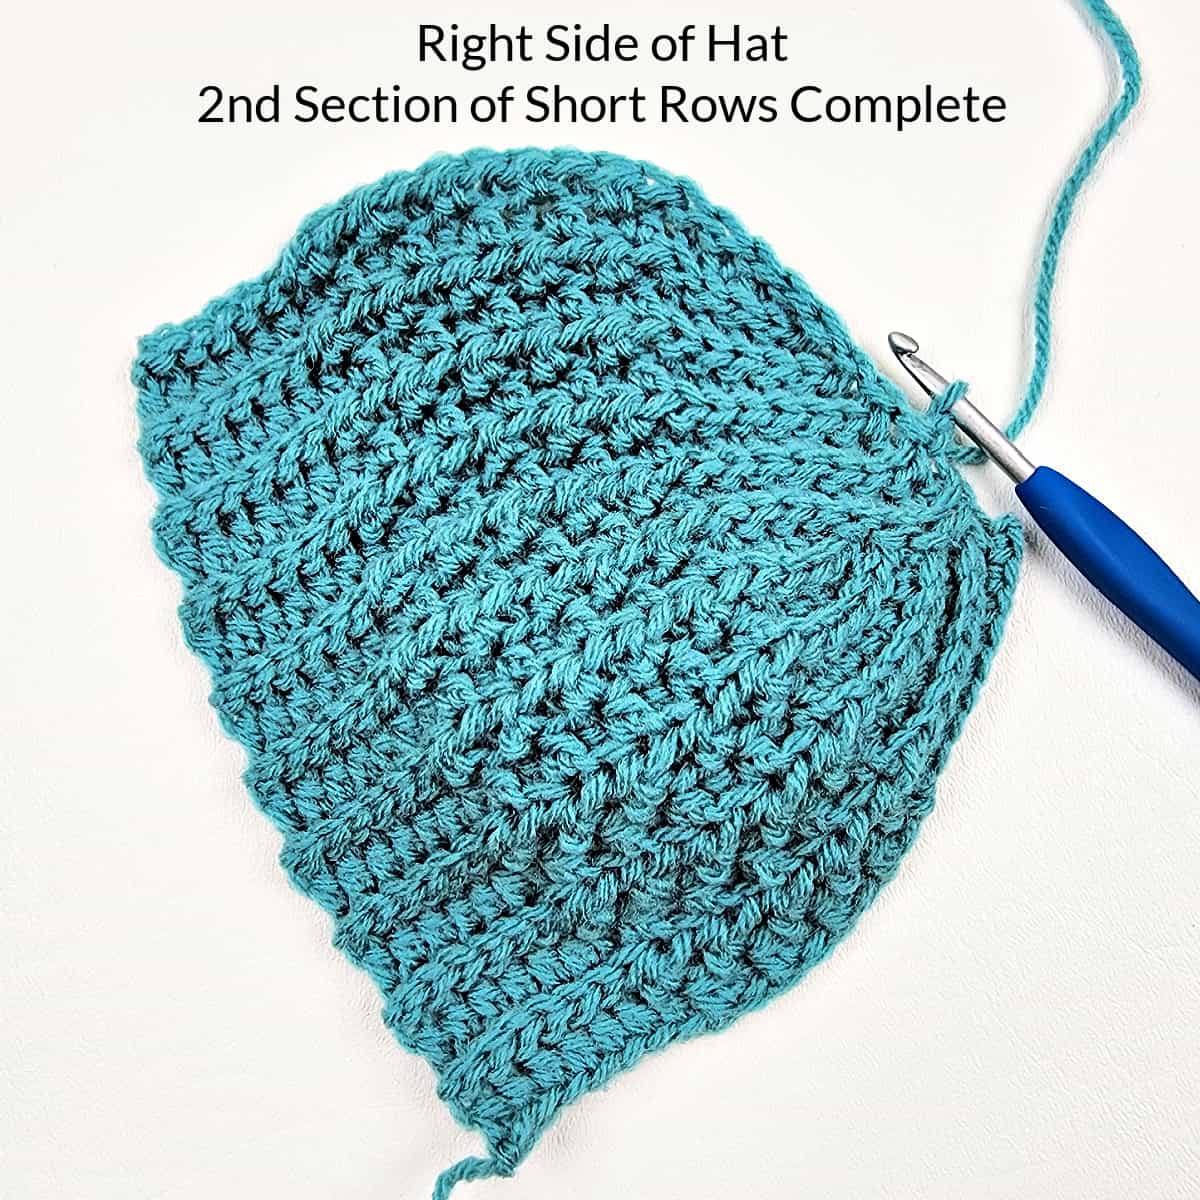 Two complete sections of an easy crochet short row hat.